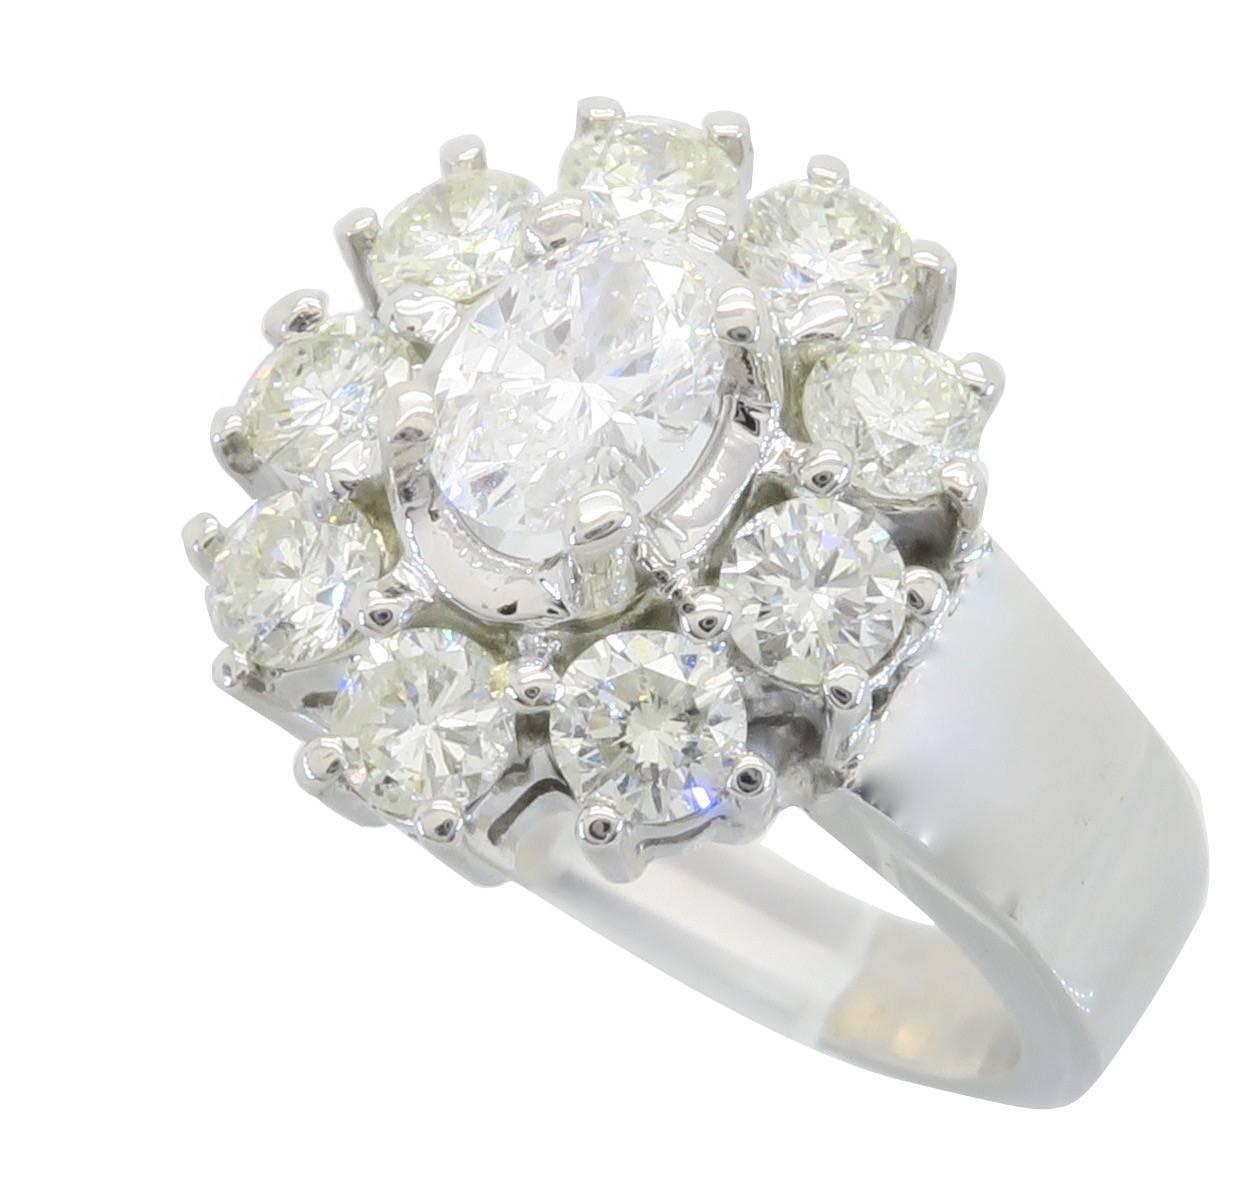 Beautiful 14K White Gold Diamond halo-style ring has an Oval Brilliant cut diamond in the center weighing approximately .34ct, the diamond has G-H color, I clarity. Surrounding this beautiful Diamond are an additional 9 Round Brilliant Cut Diamonds.